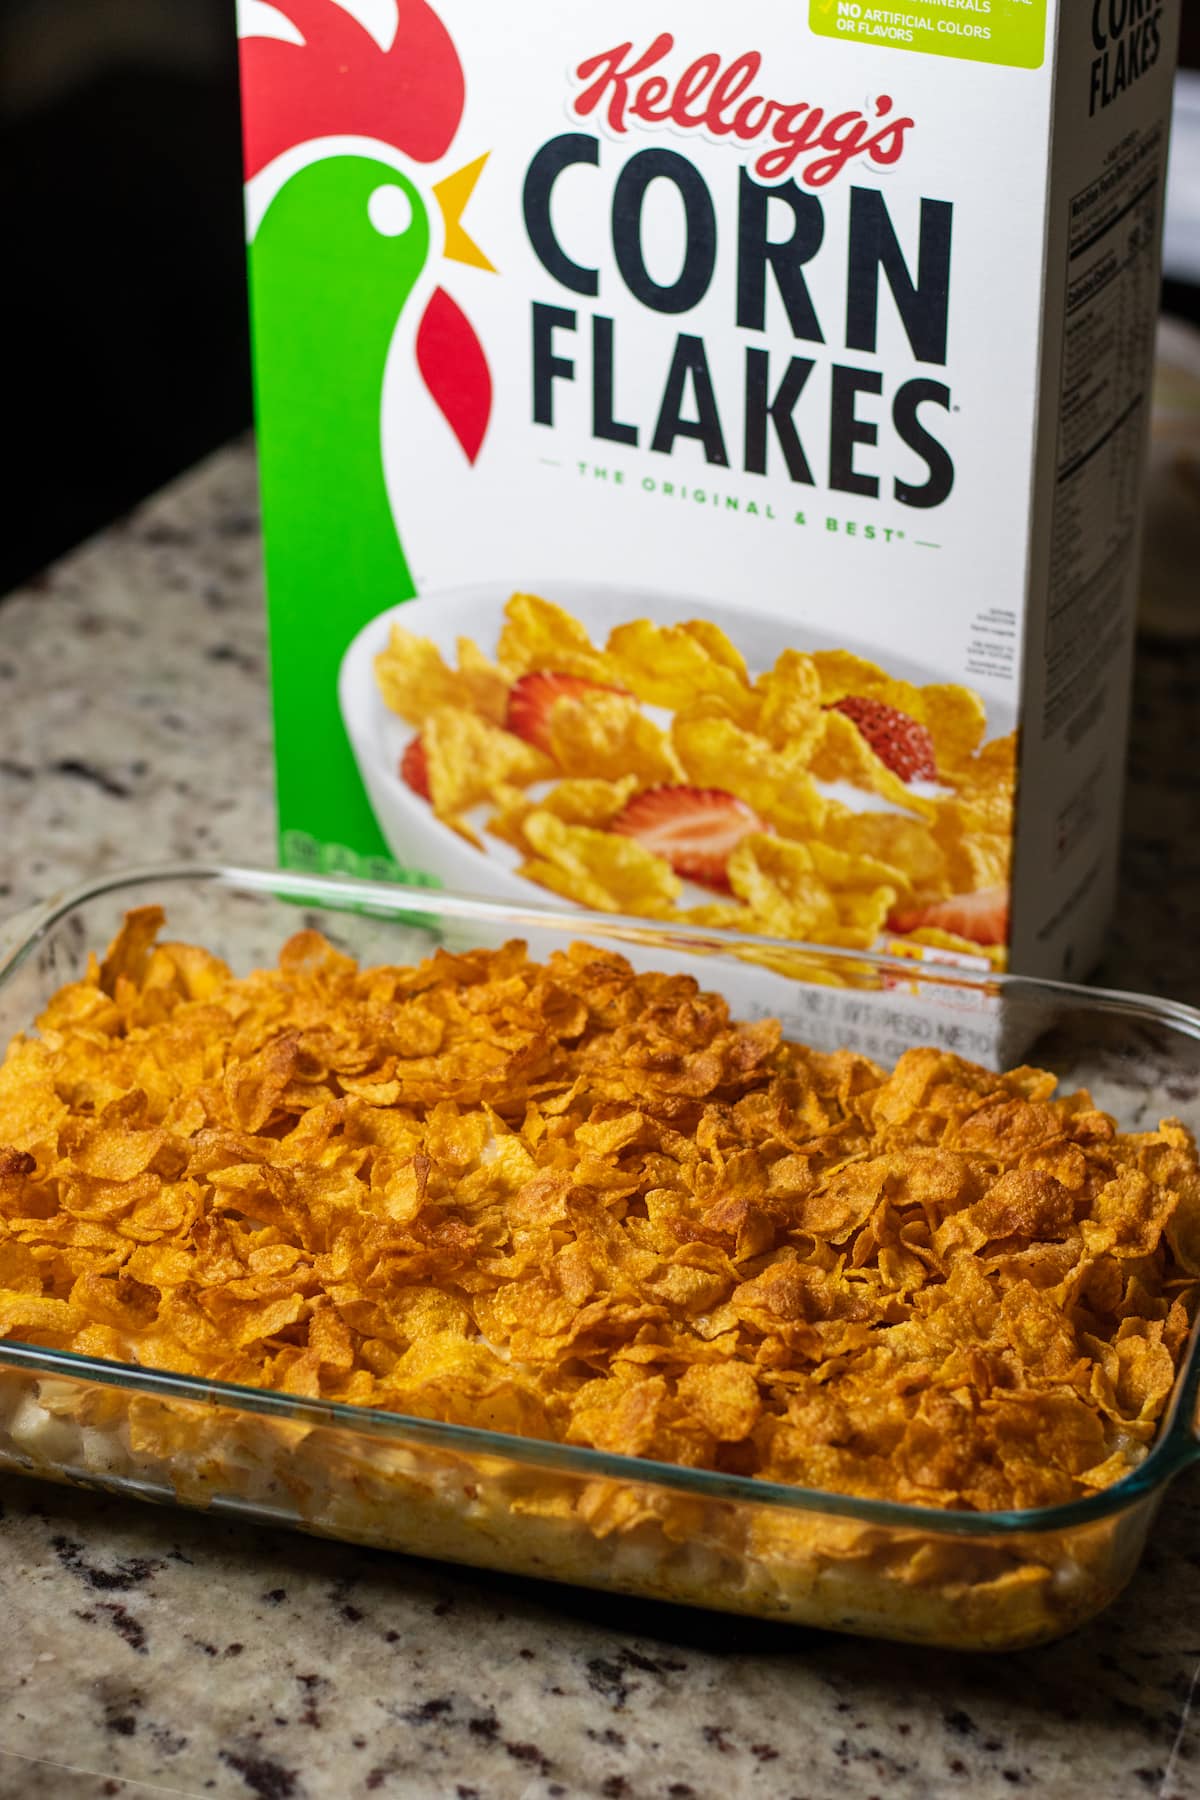 a finished casserole in front of a box of corn flakes.